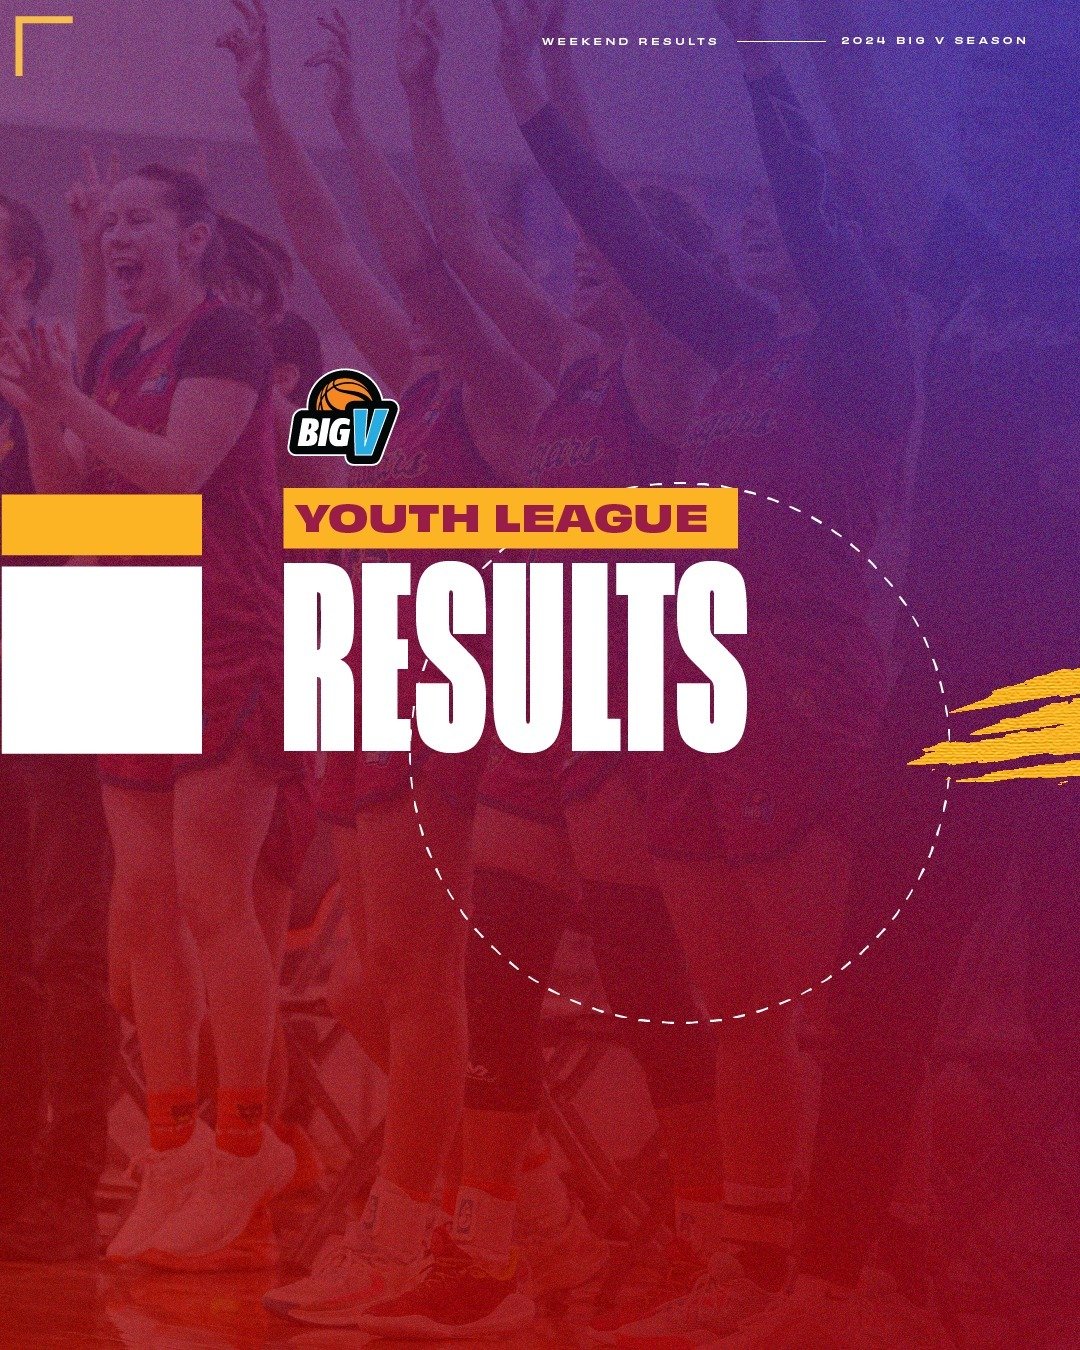 Big V Youth League Results 📣⁠
⁠
Our Youth teams started off their double-header weekend defending the den on Saturday night against Geelong United. ⁠
⁠
On Sunday, our Youth Men's undefeated record was snapped against the defending champions at Hume,